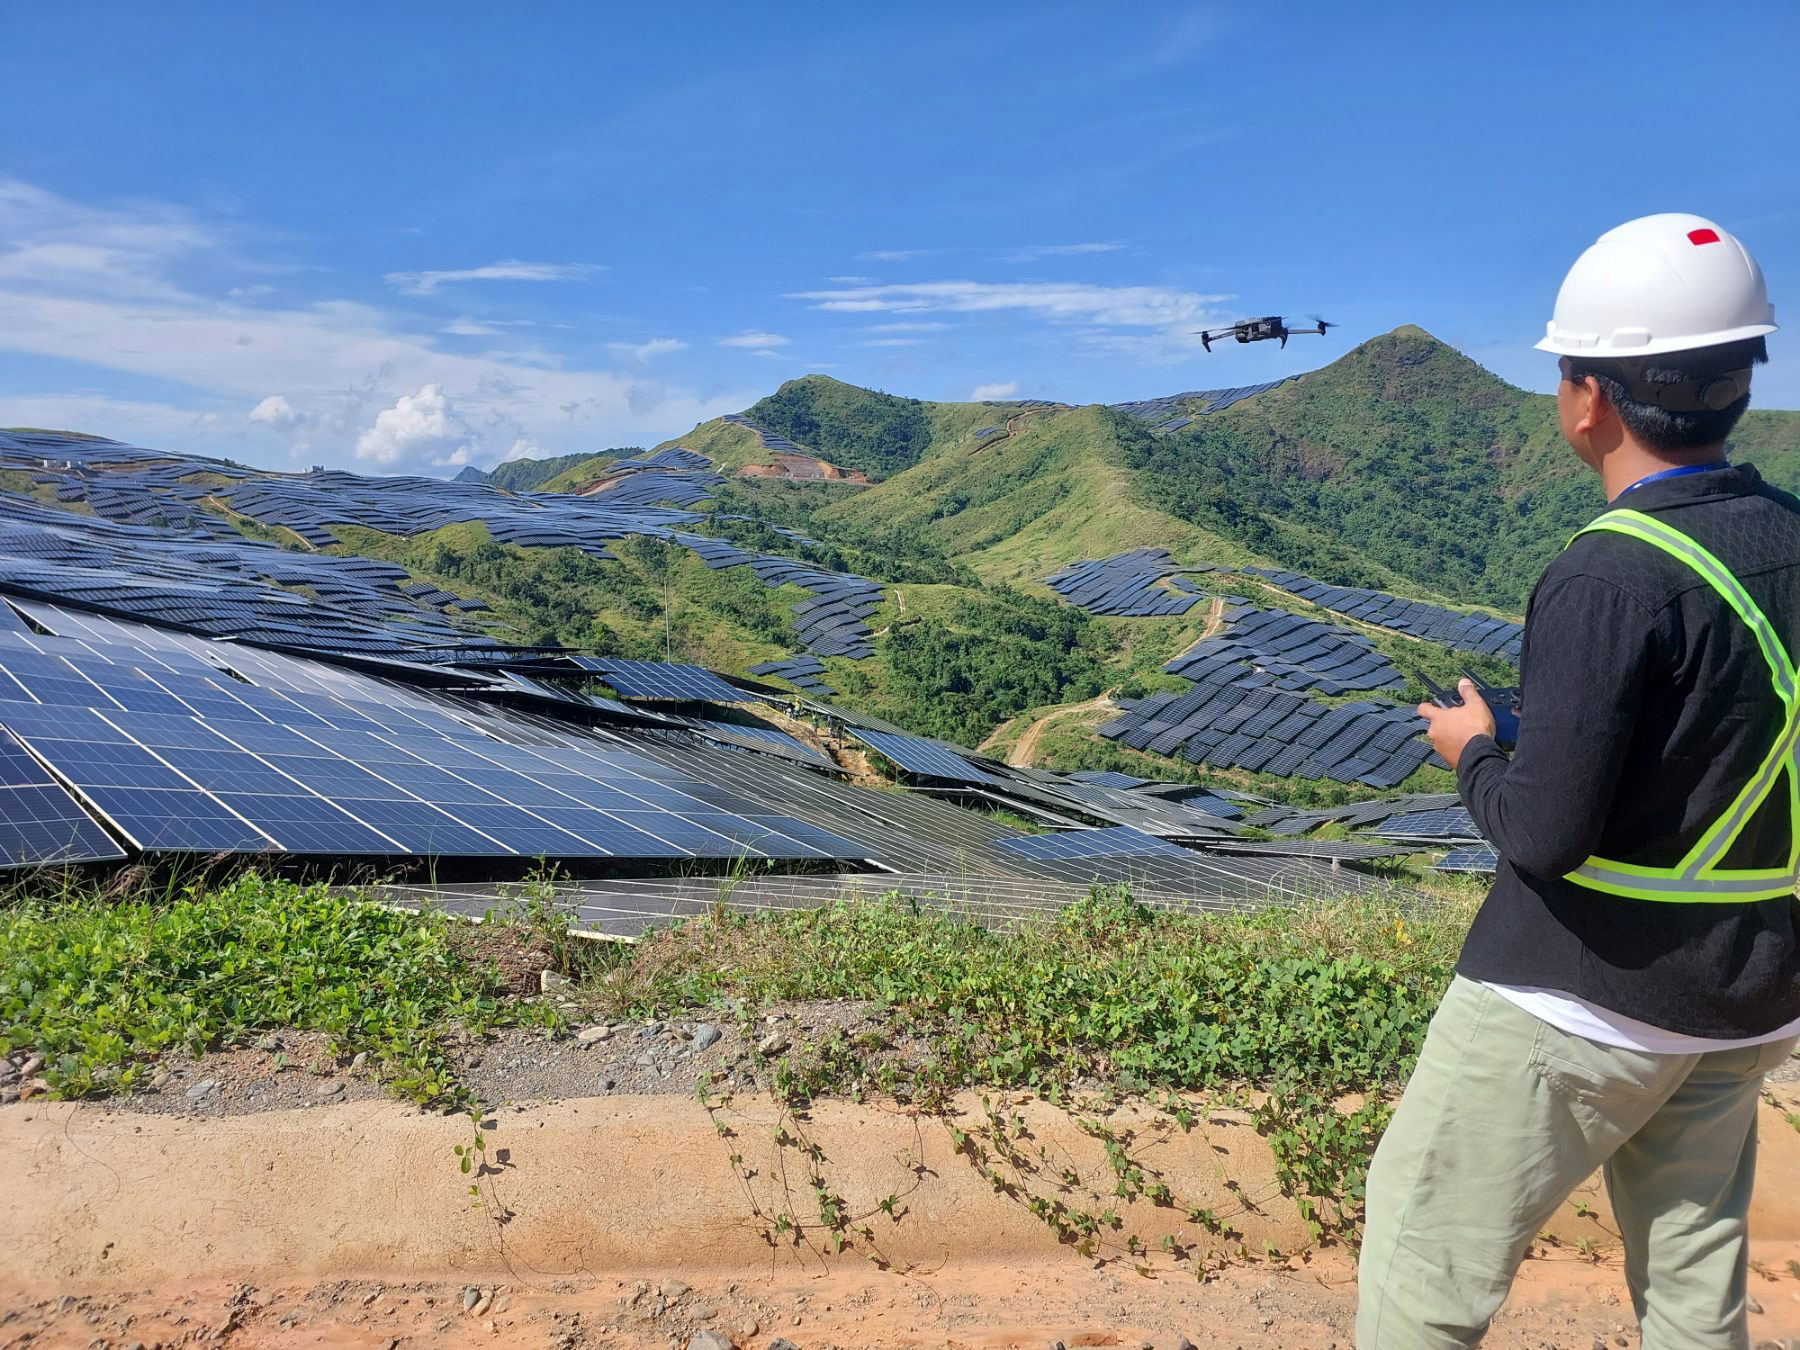 Hedcor utilizes drones to oversee renewable energy assets